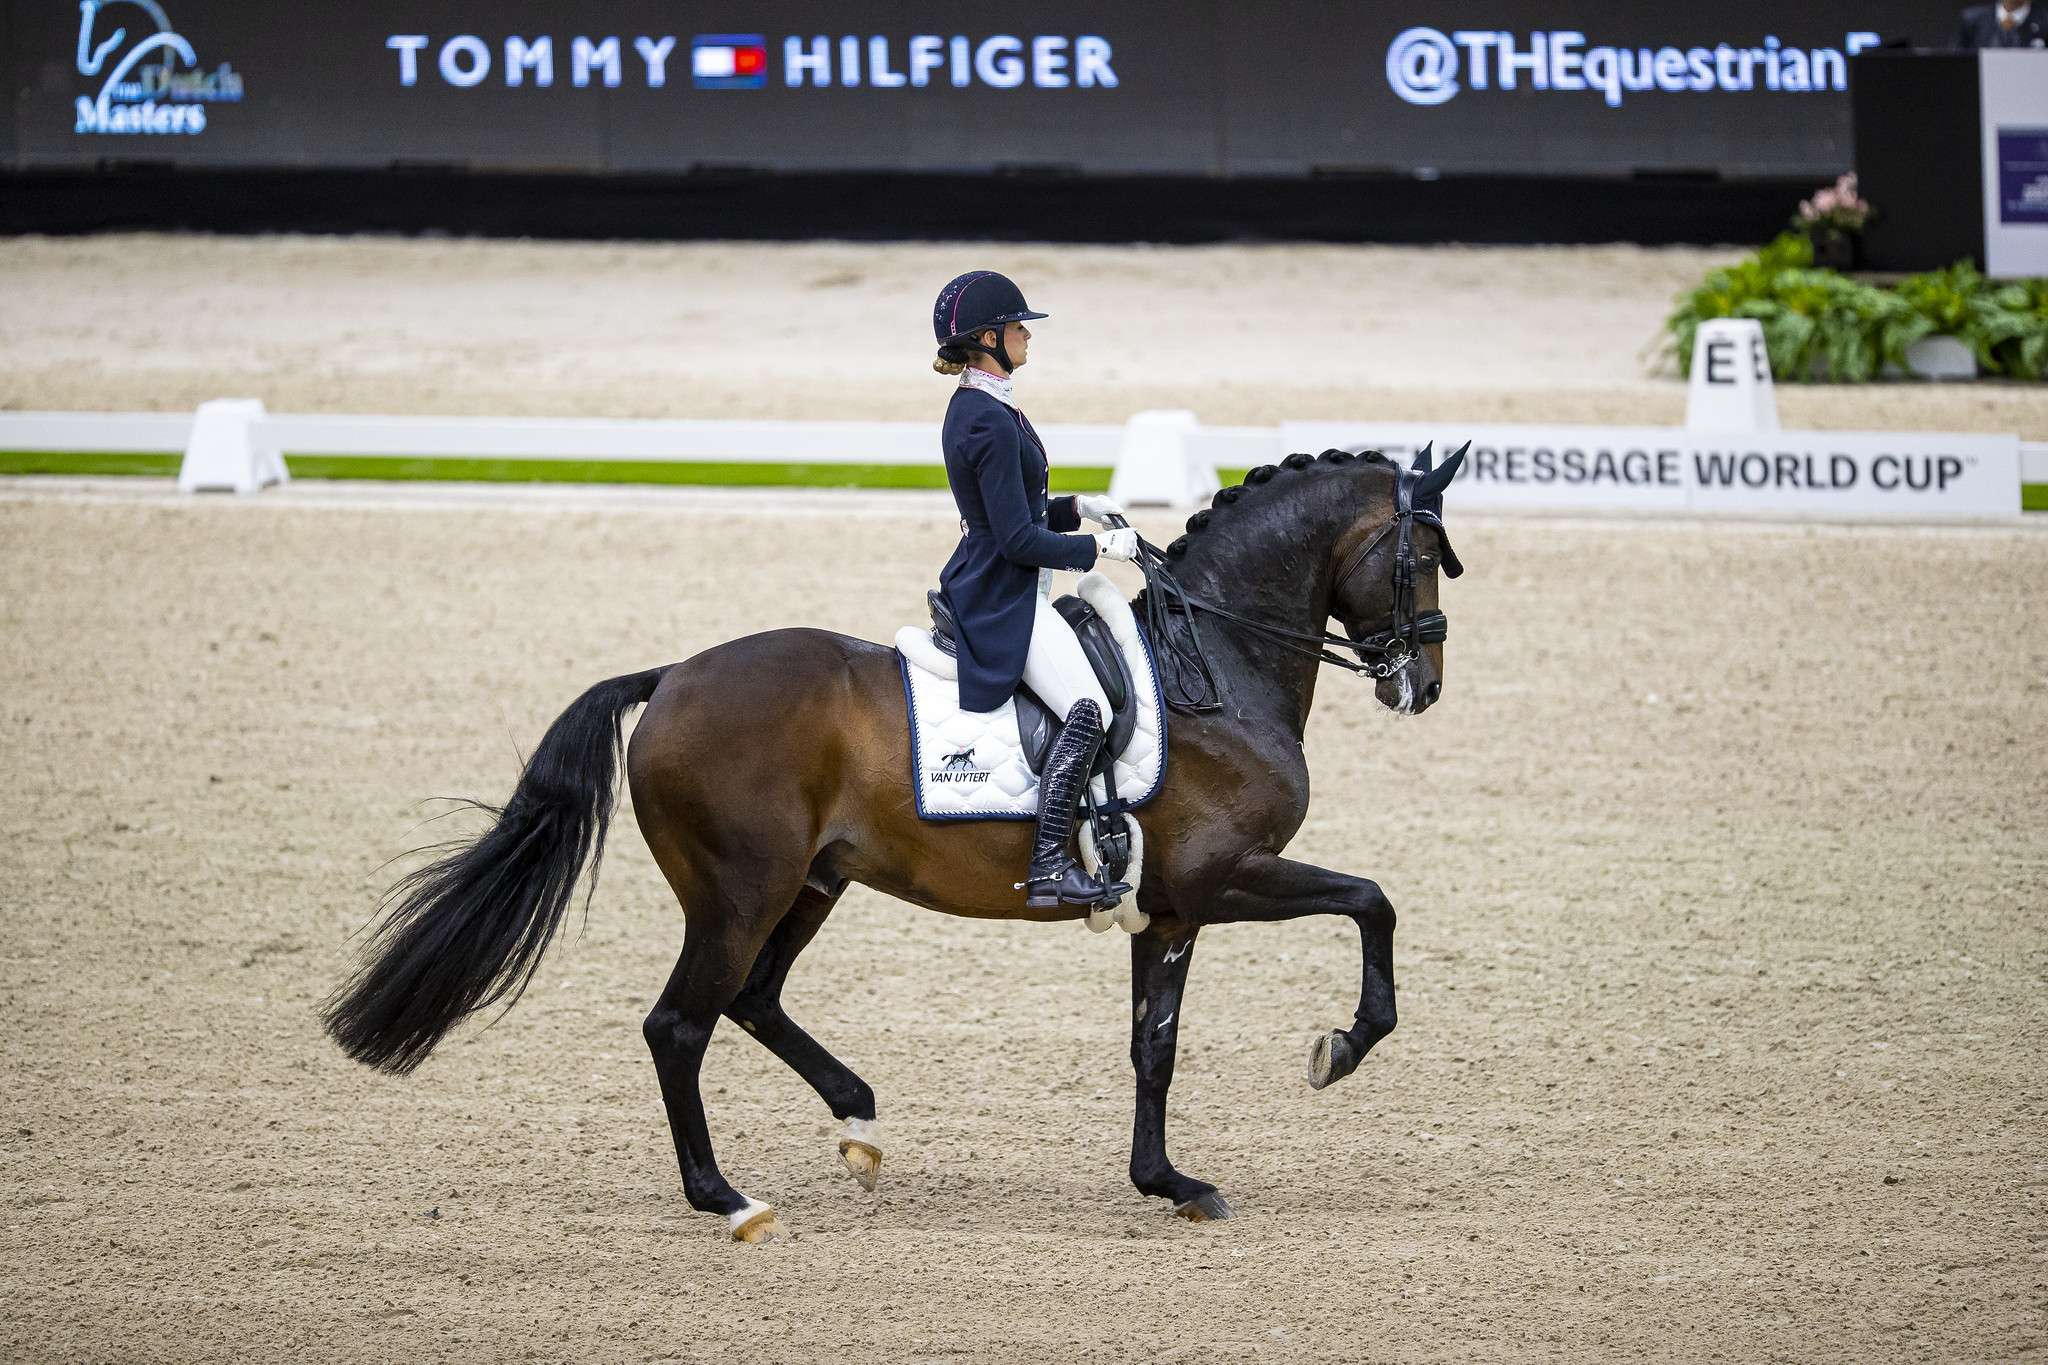 Dinja van Liere (NED) rides on Hermes N.O.P. - second place at the FEI Dressage World Cup 2022/23 - ’s Hertogenbosch (NED)
Copyright ©FEI/Leanjo de Koster